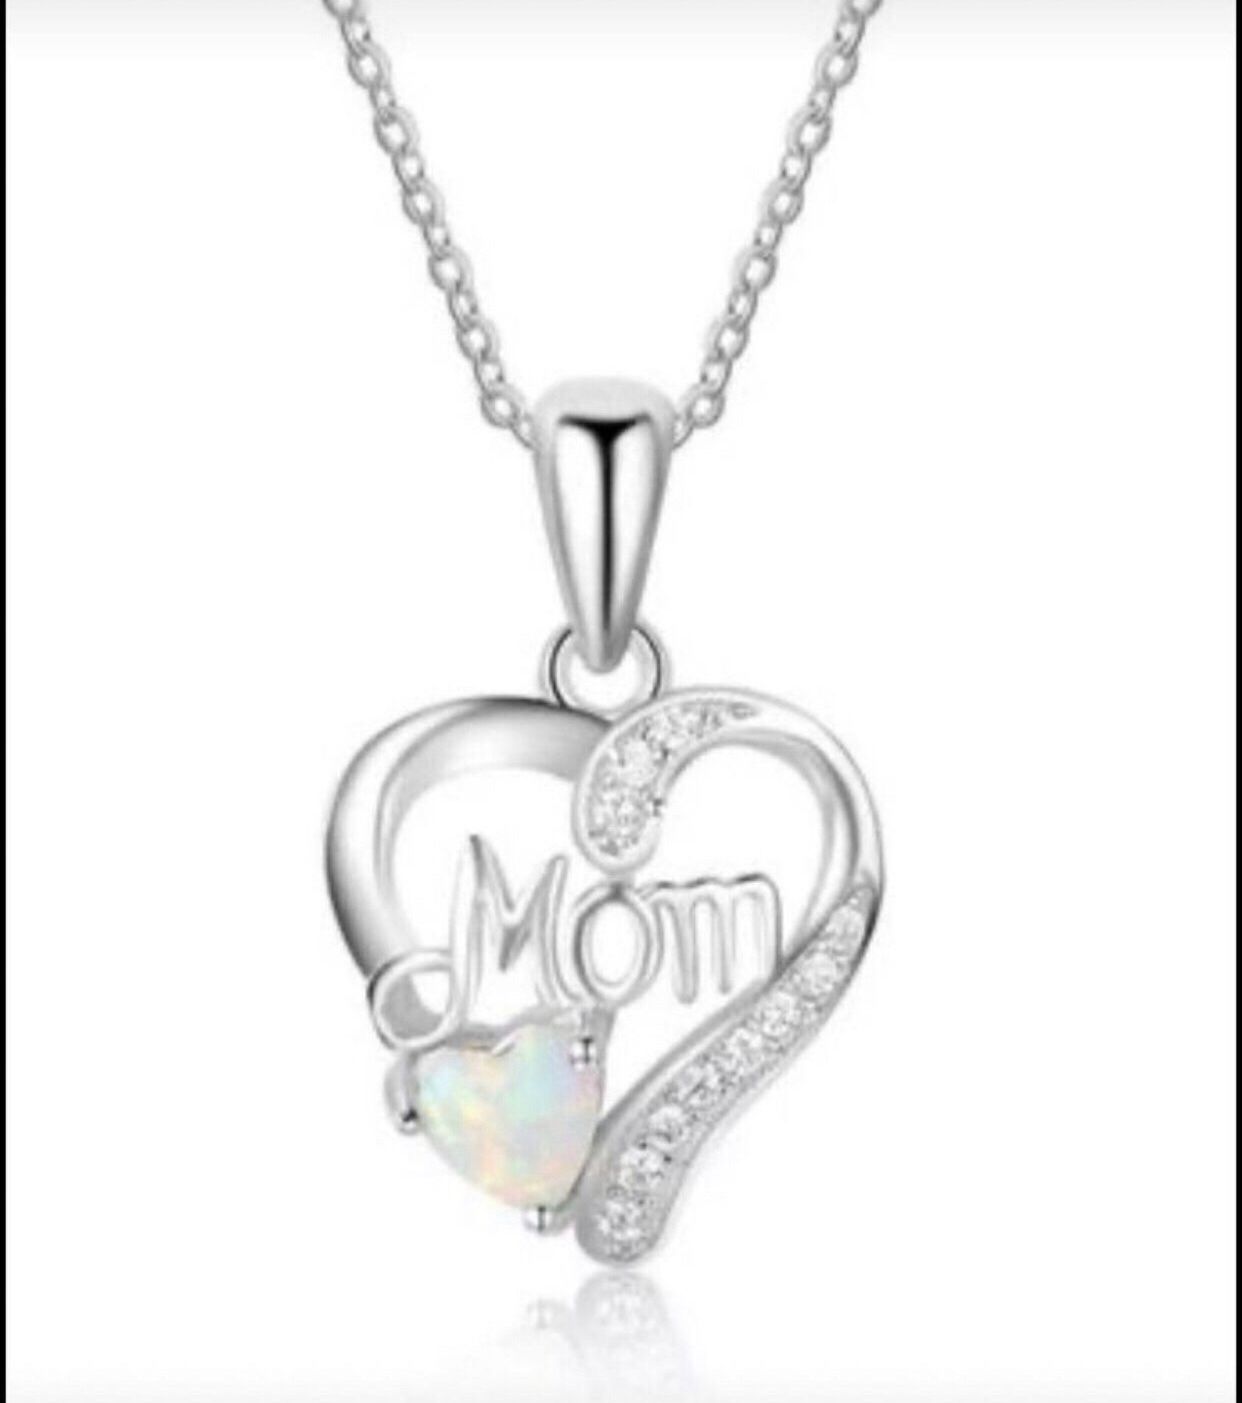 Mom Sterling Silver And Opal Necklace 